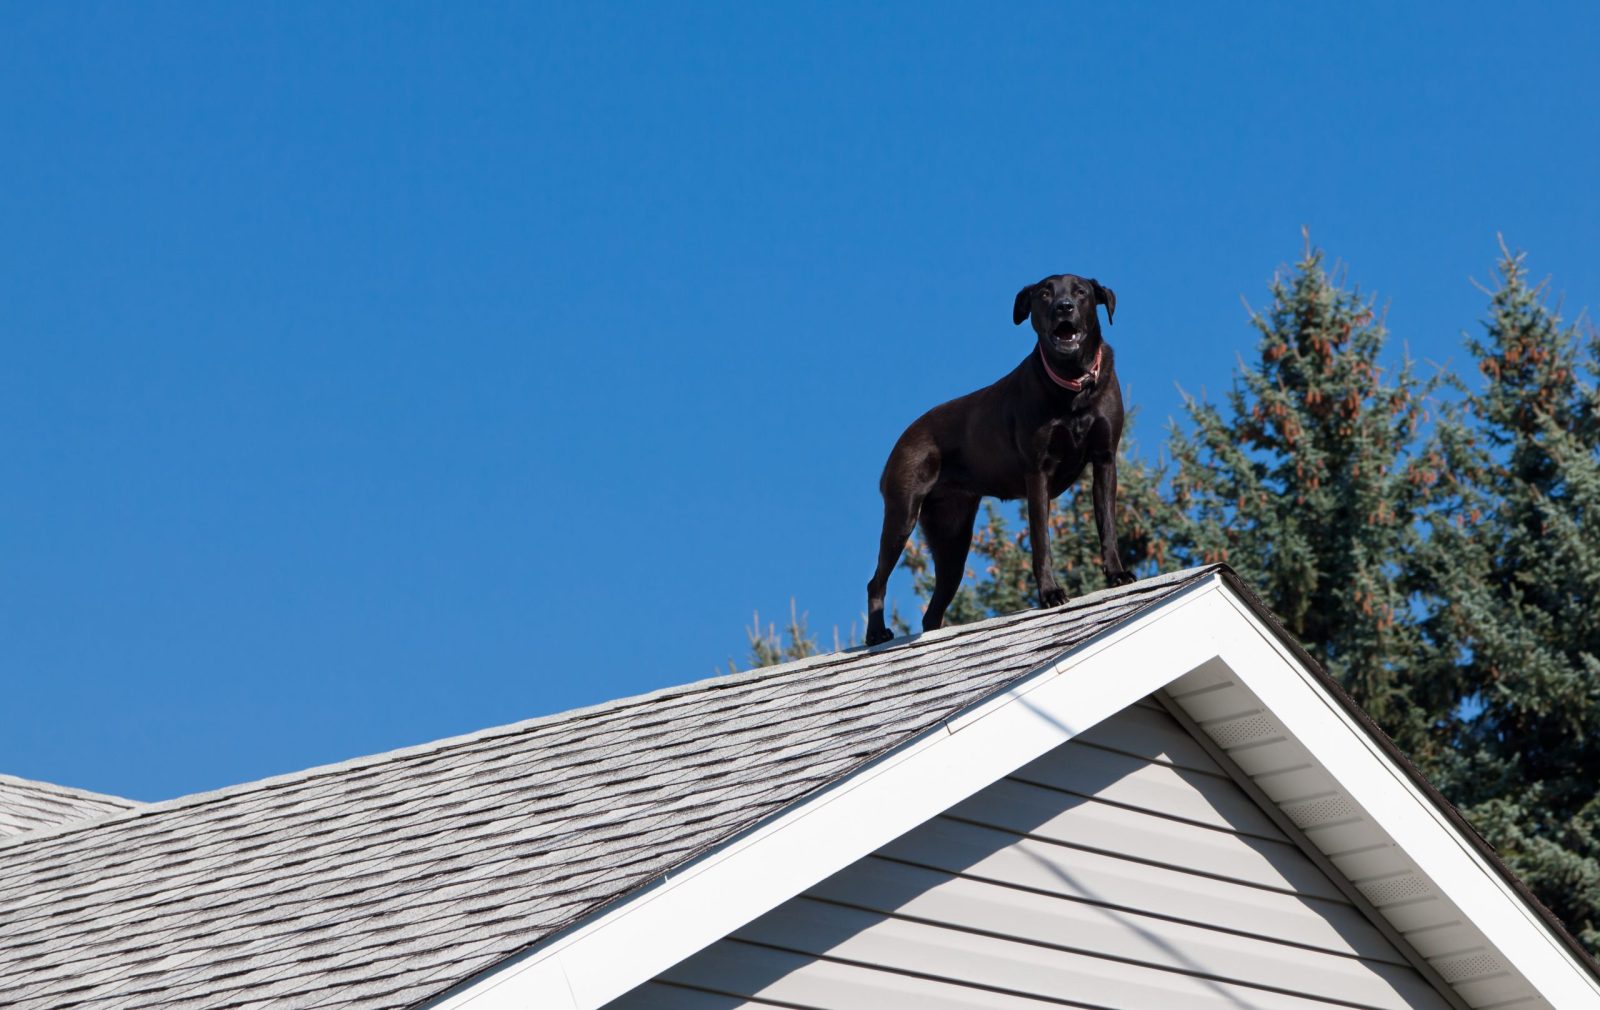 Black dog on the roof of a house